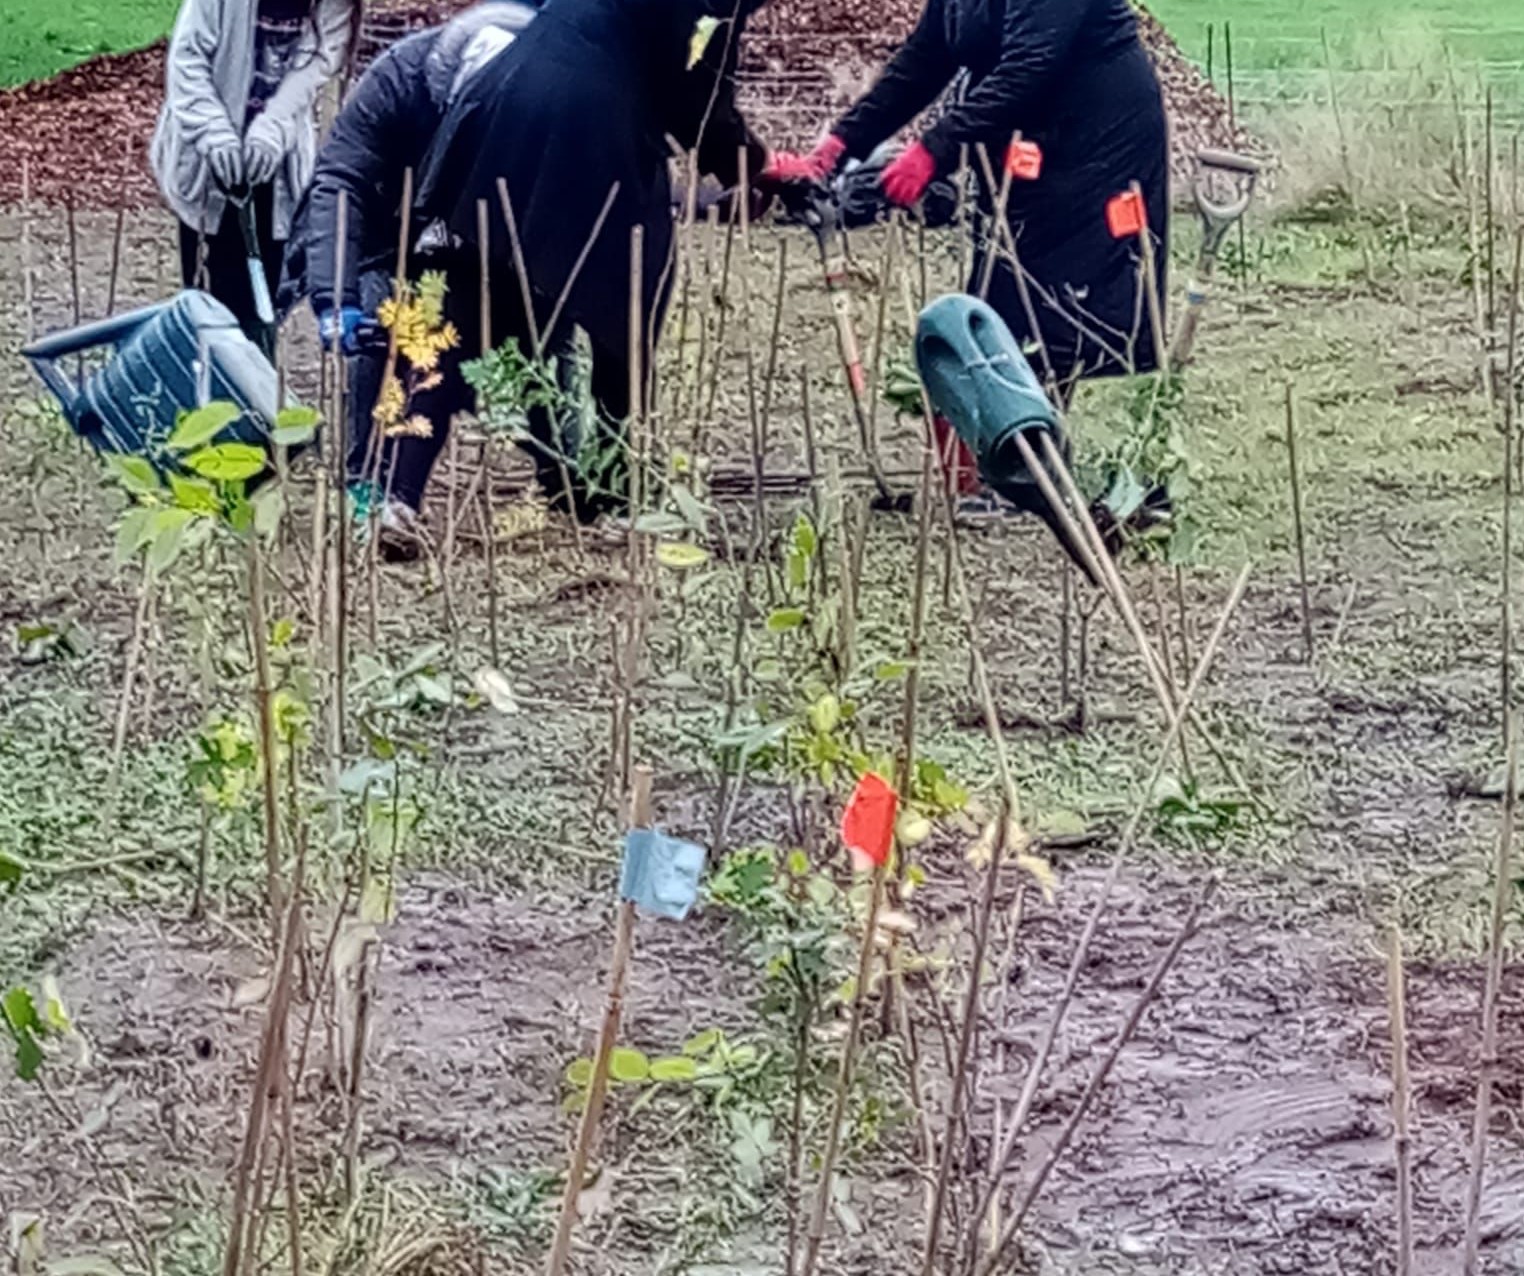 Lajna Ima'illah UK on Twitter: ".@LajnaUK has pledged to plant 100,000 trees across the UK to commemorate #100Years of our worldwide empowered Muslim women's organisation. Marking this, Lajna from Nottingham planted 225